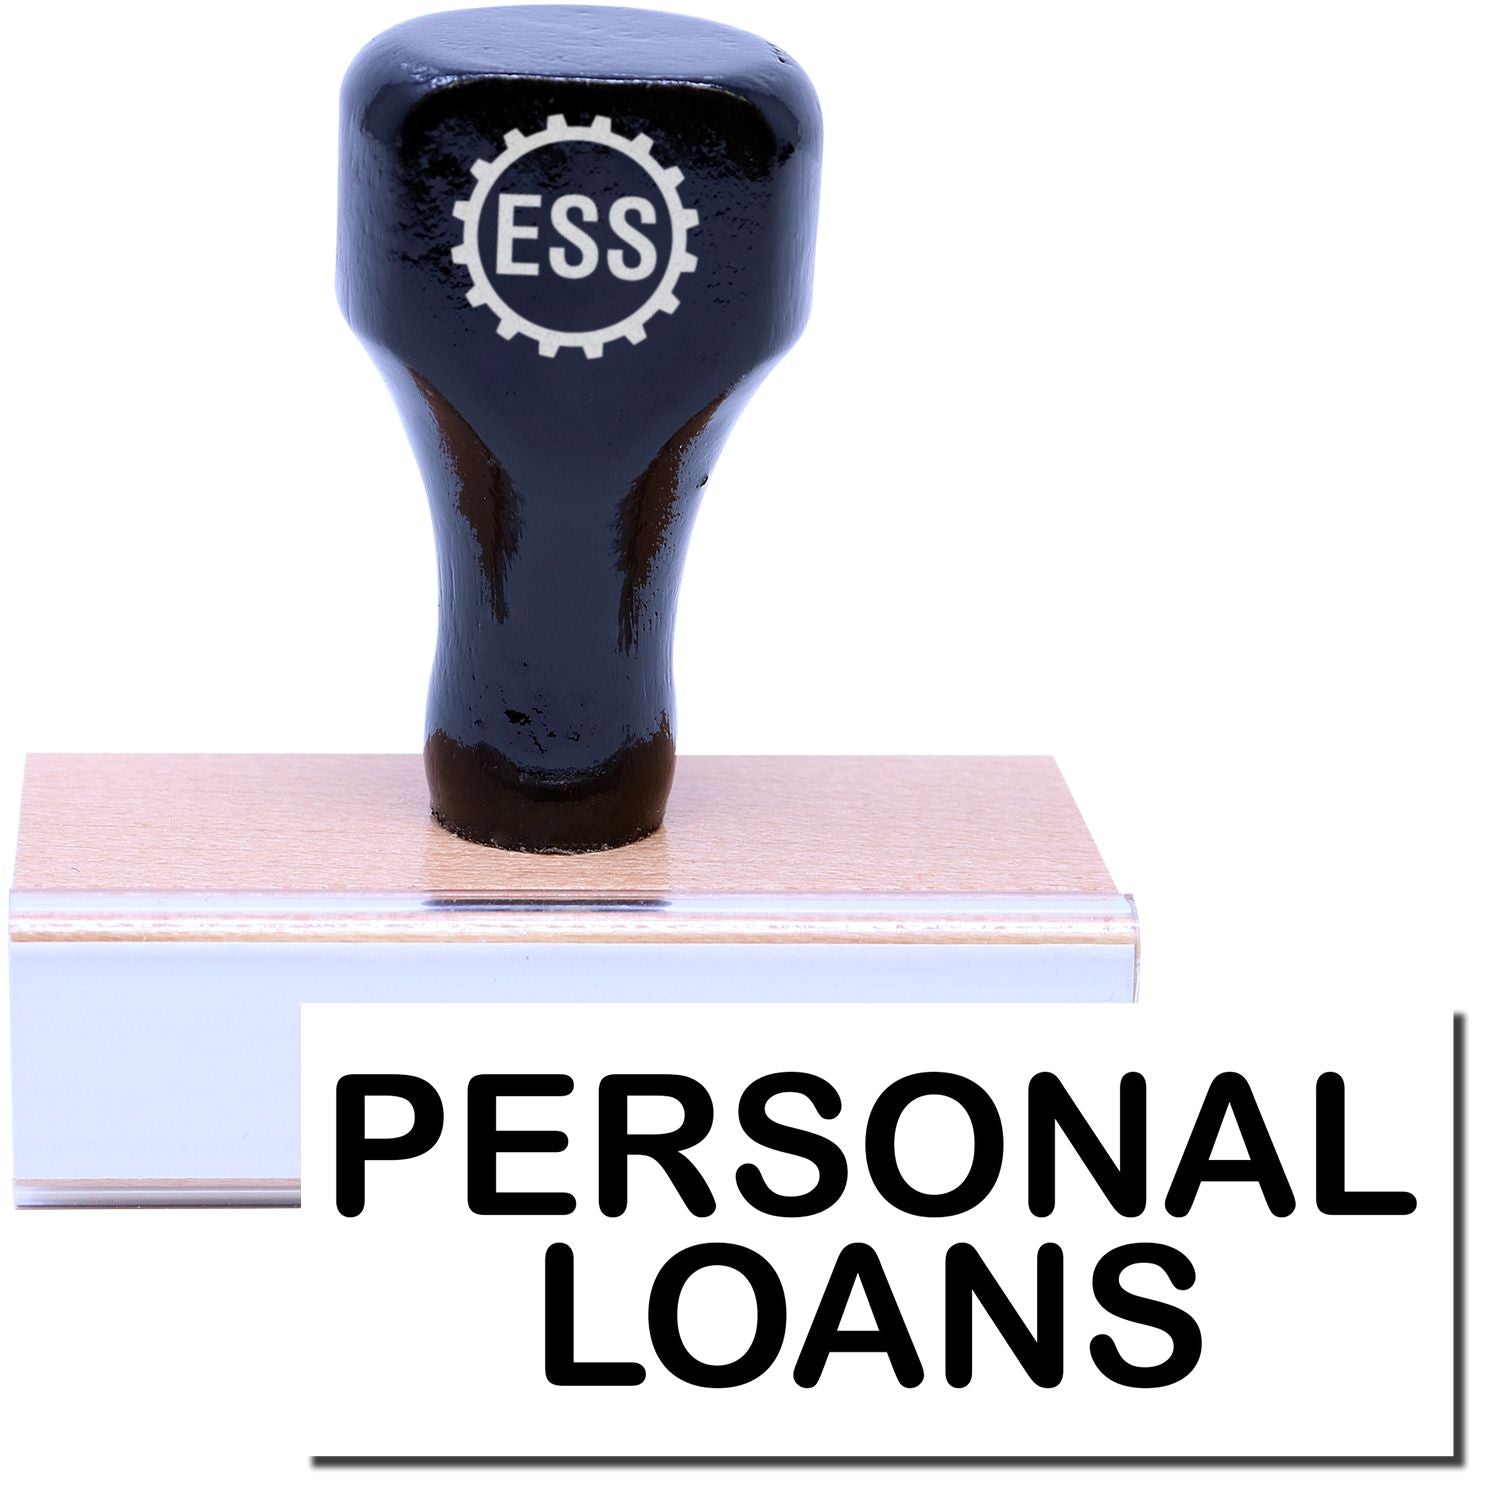 A stock office rubber stamp with a stamped image showing how the text "PERSONAL LOANS" in a large font is displayed after stamping.